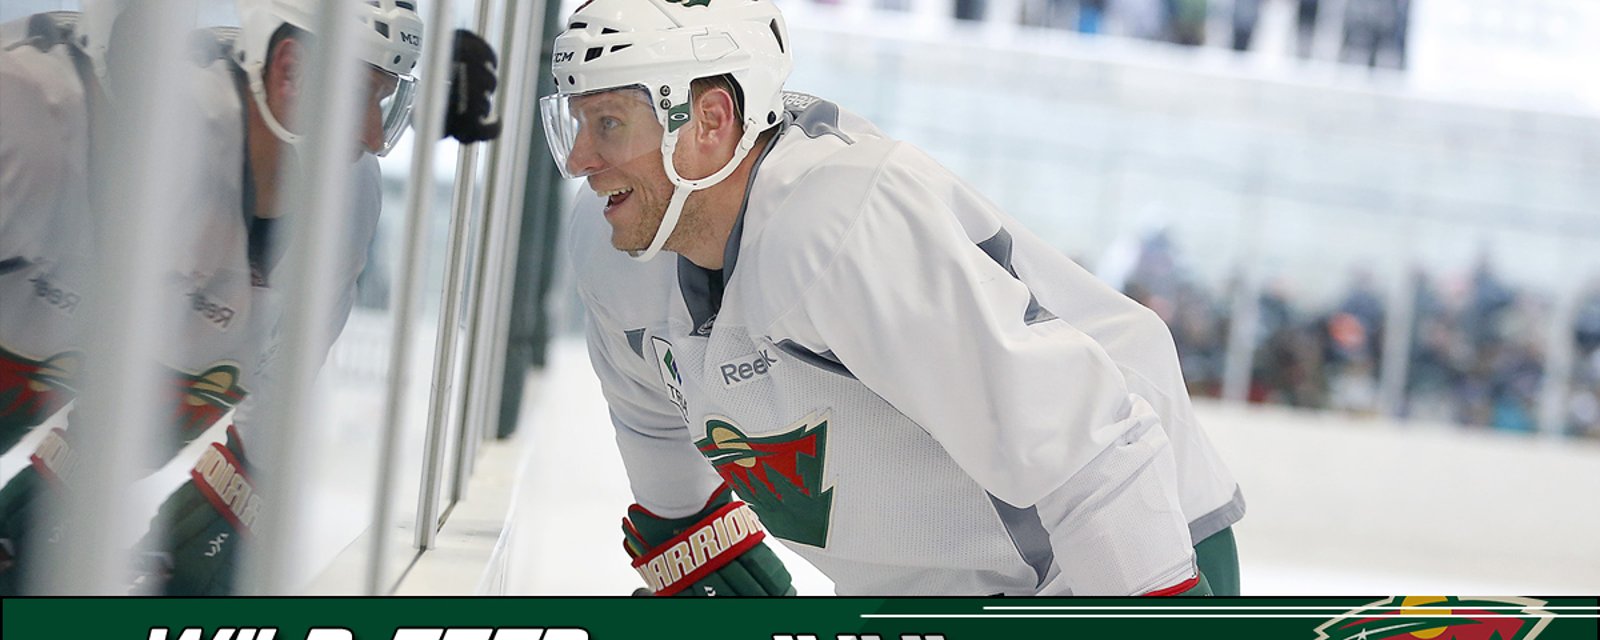 Mikko Koivu acknowledged by the NHL as a nominee for a prestigious award.